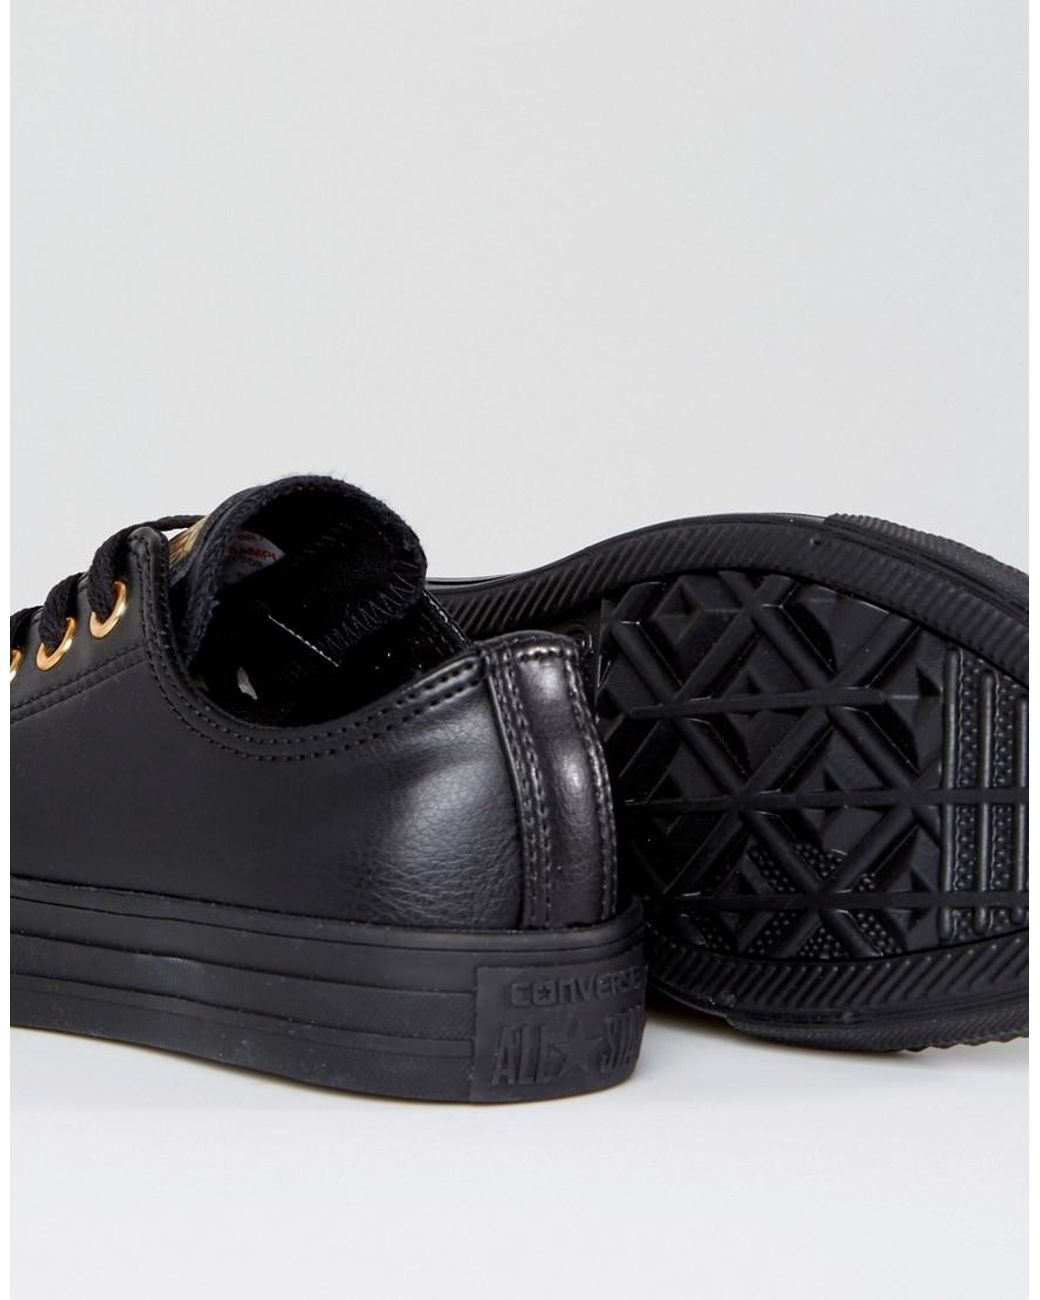 Converse Chuck Taylor Dainty Sneakers In Black With Gold Eyelets | Lyst